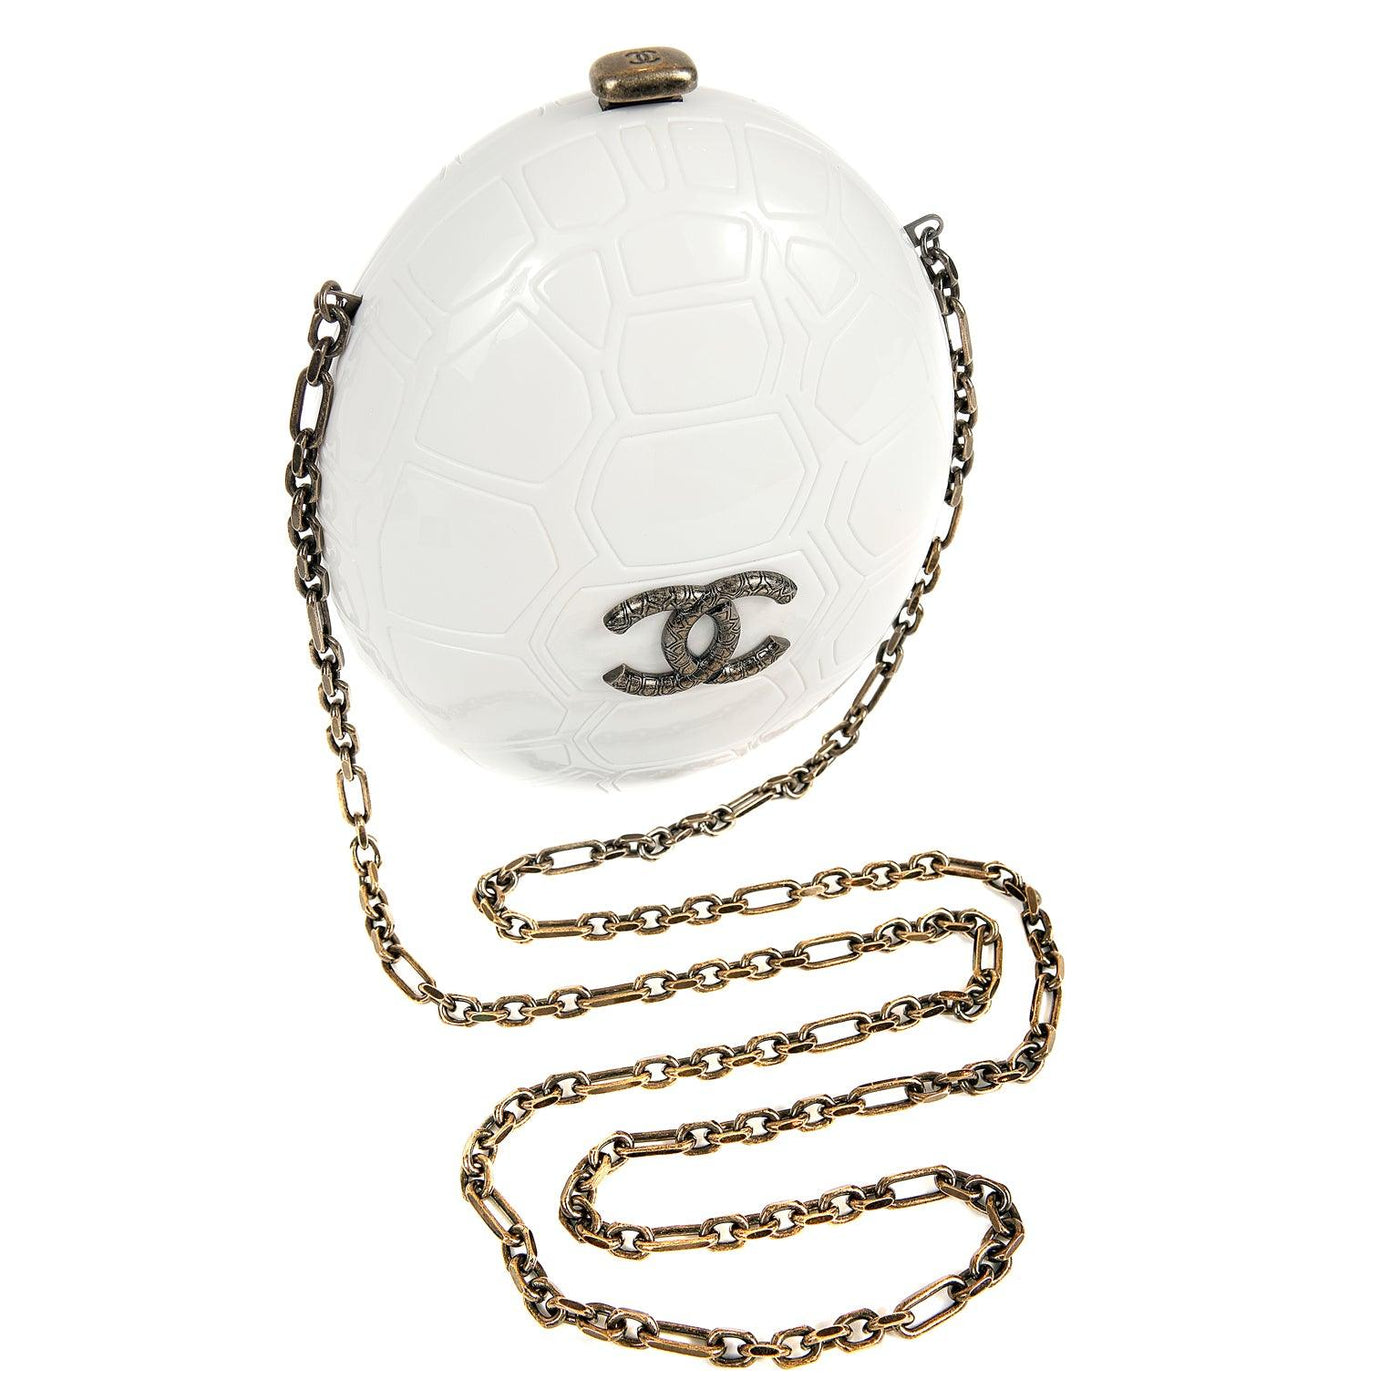 Chanel Cruise Collection Ivory Resin Turtle Shell Print Bag with strap - Only Authentics